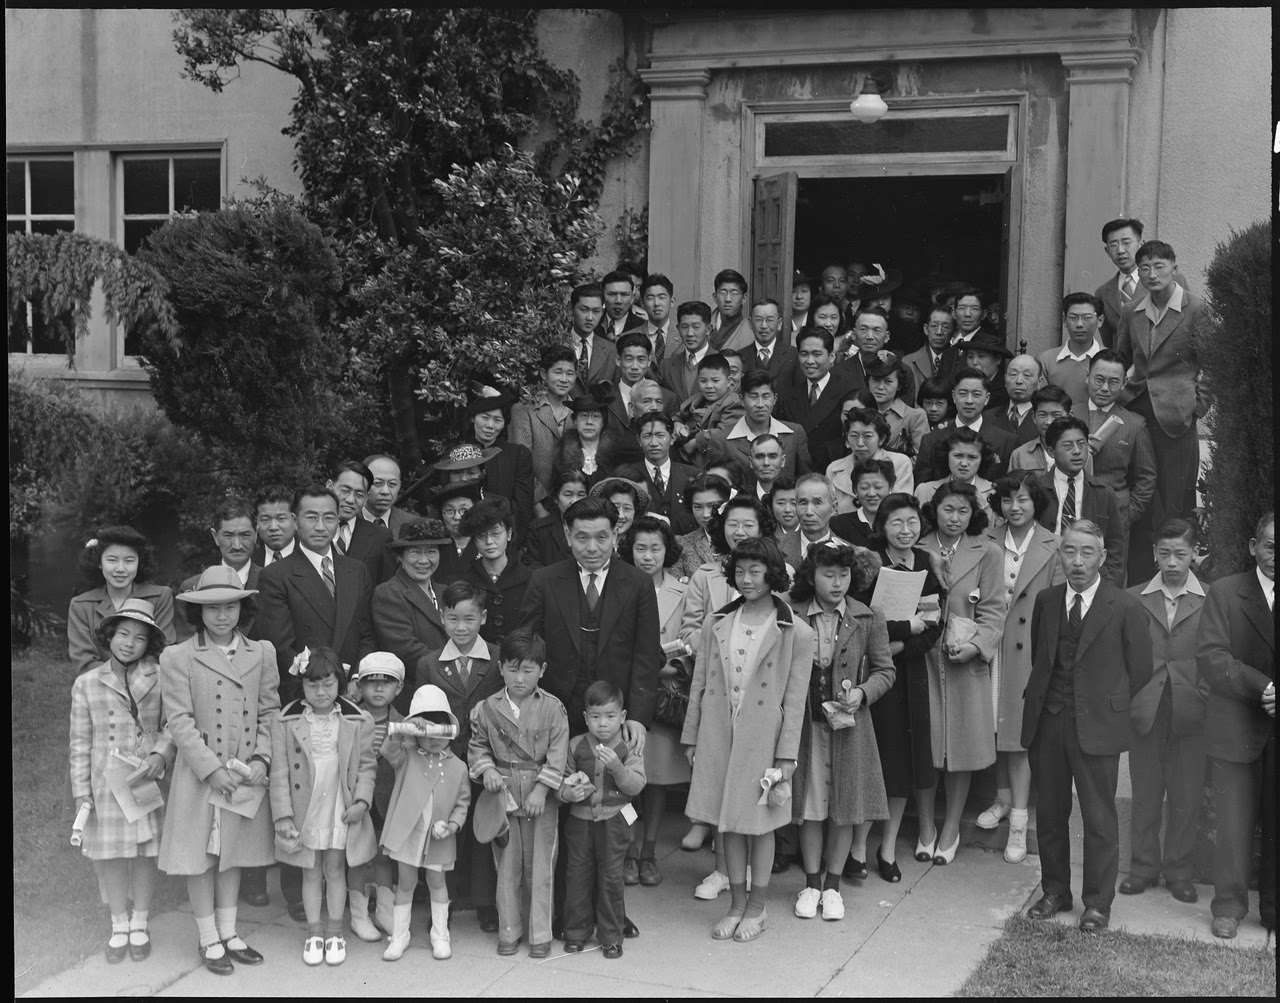 http://upload.wikimedia.org/wikipedia/commons/thumb/1/16/Oakland%2C_California._Members_of_the_Japanese_Independent_Congregational_Church_attend_Easter_servic_._._._-_NARA_-_536048.tif/lossy-page1-1280px-Oakland%2C_California._Members_of_the_Japanese_Independent_Congregational_Church_attend_Easter_servic_._._._-_NARA_-_536048.tif.jpg